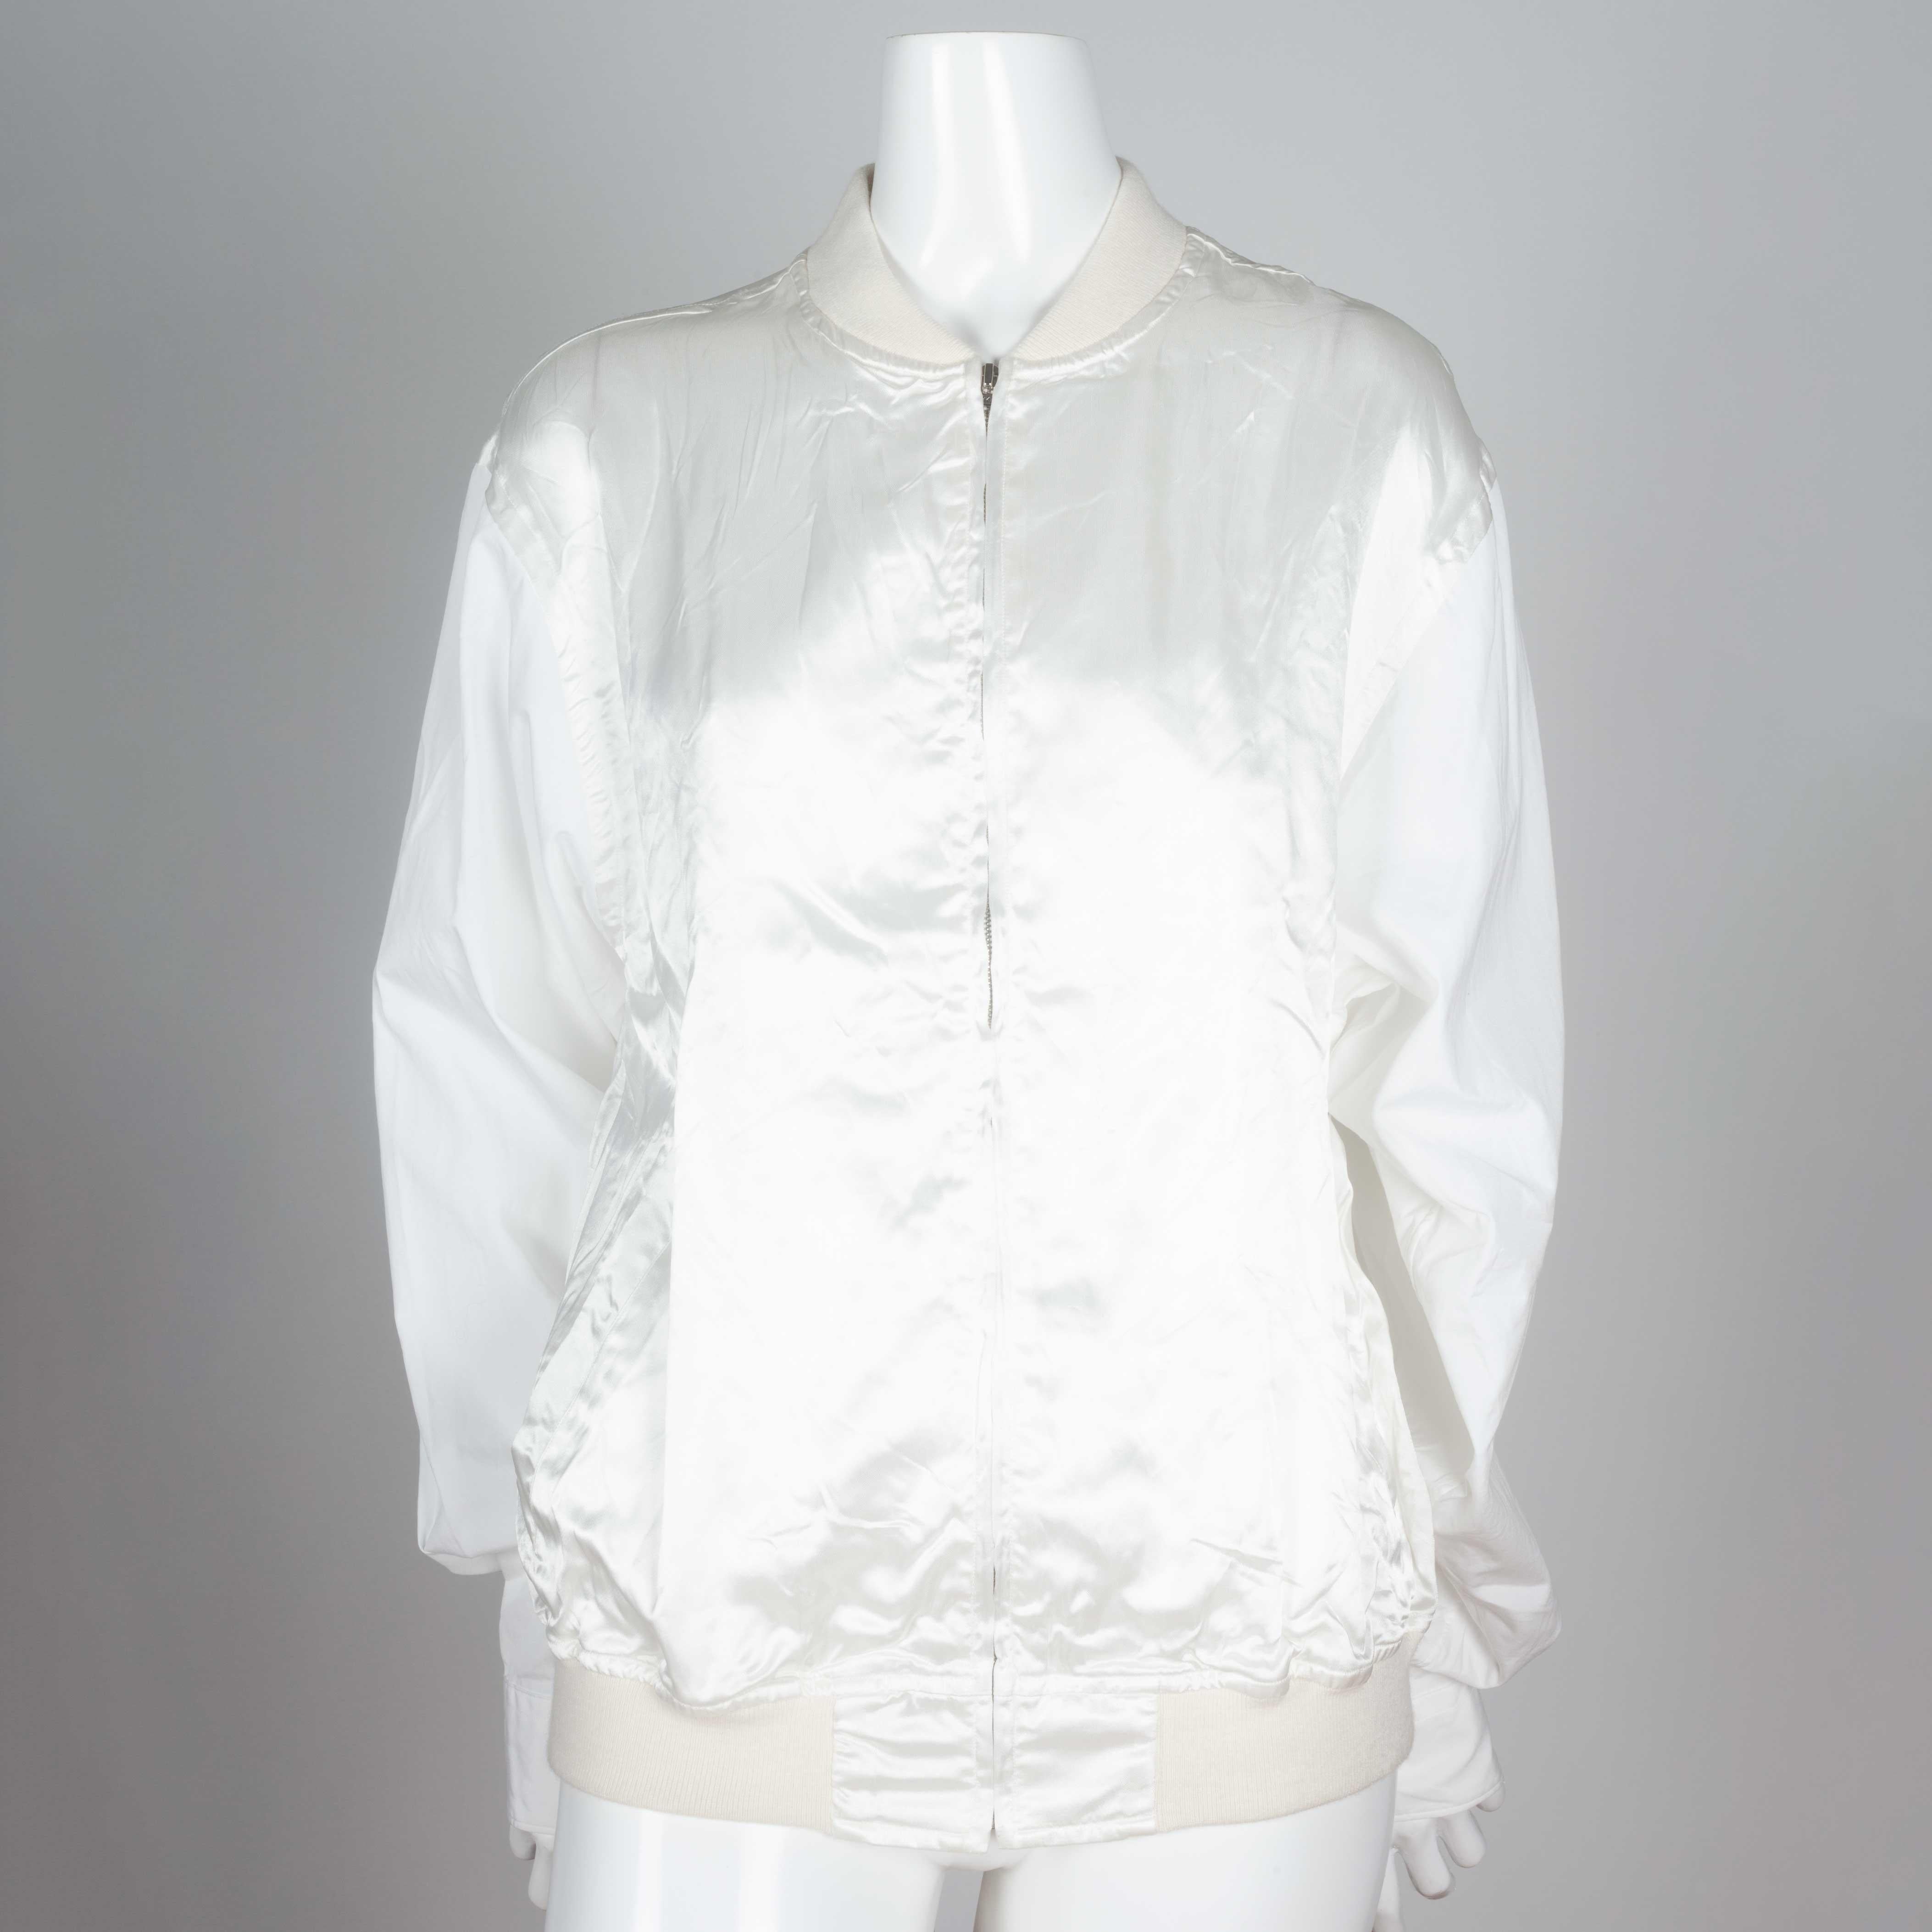 Comme des Garçons white and off-white bomber style shirt from Japan with slinky rayon torso, cotton shirt sleeves and cotton ribbing. A unique combo of jacket, dress shirt and blouse. 

YEAR: Unknown
MARKED SIZE: M
US WOMEN'S: M/L
US MEN'S: S/M
FIT: